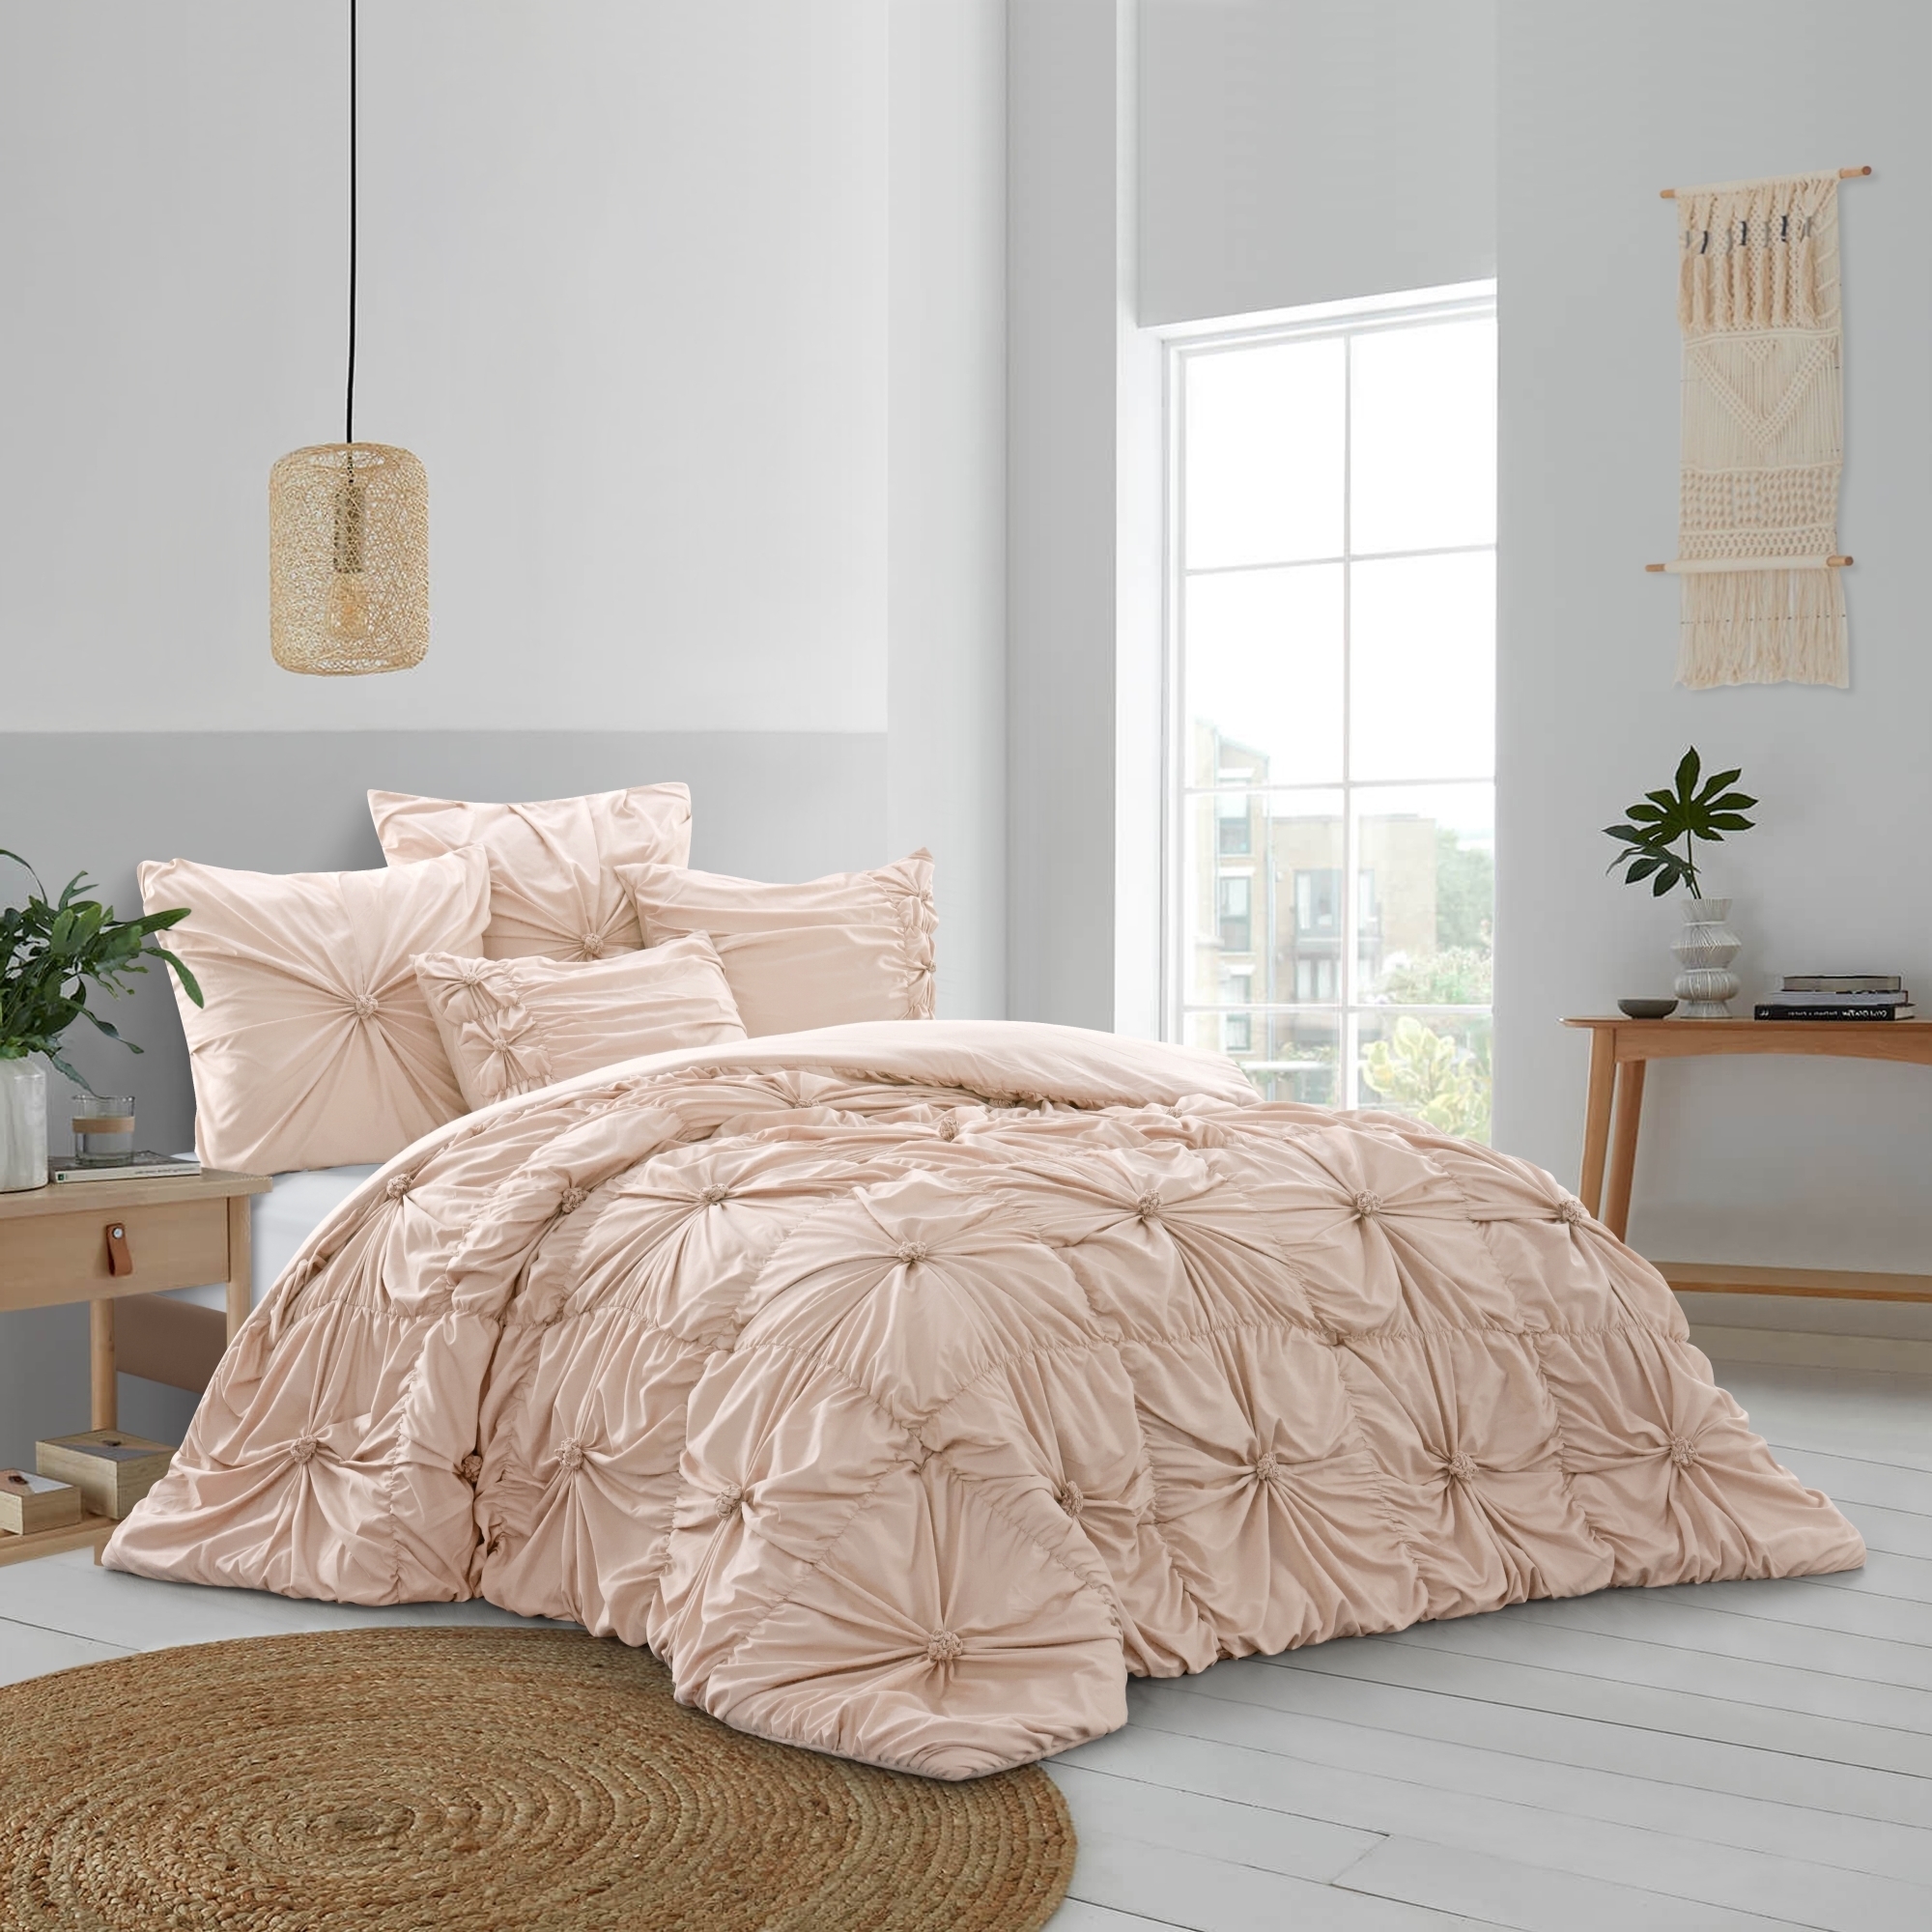 Bethel Comforter Set -Pinch Pleated Pintuck , Solid Neutral Color - Blush, Twin/twin Xl